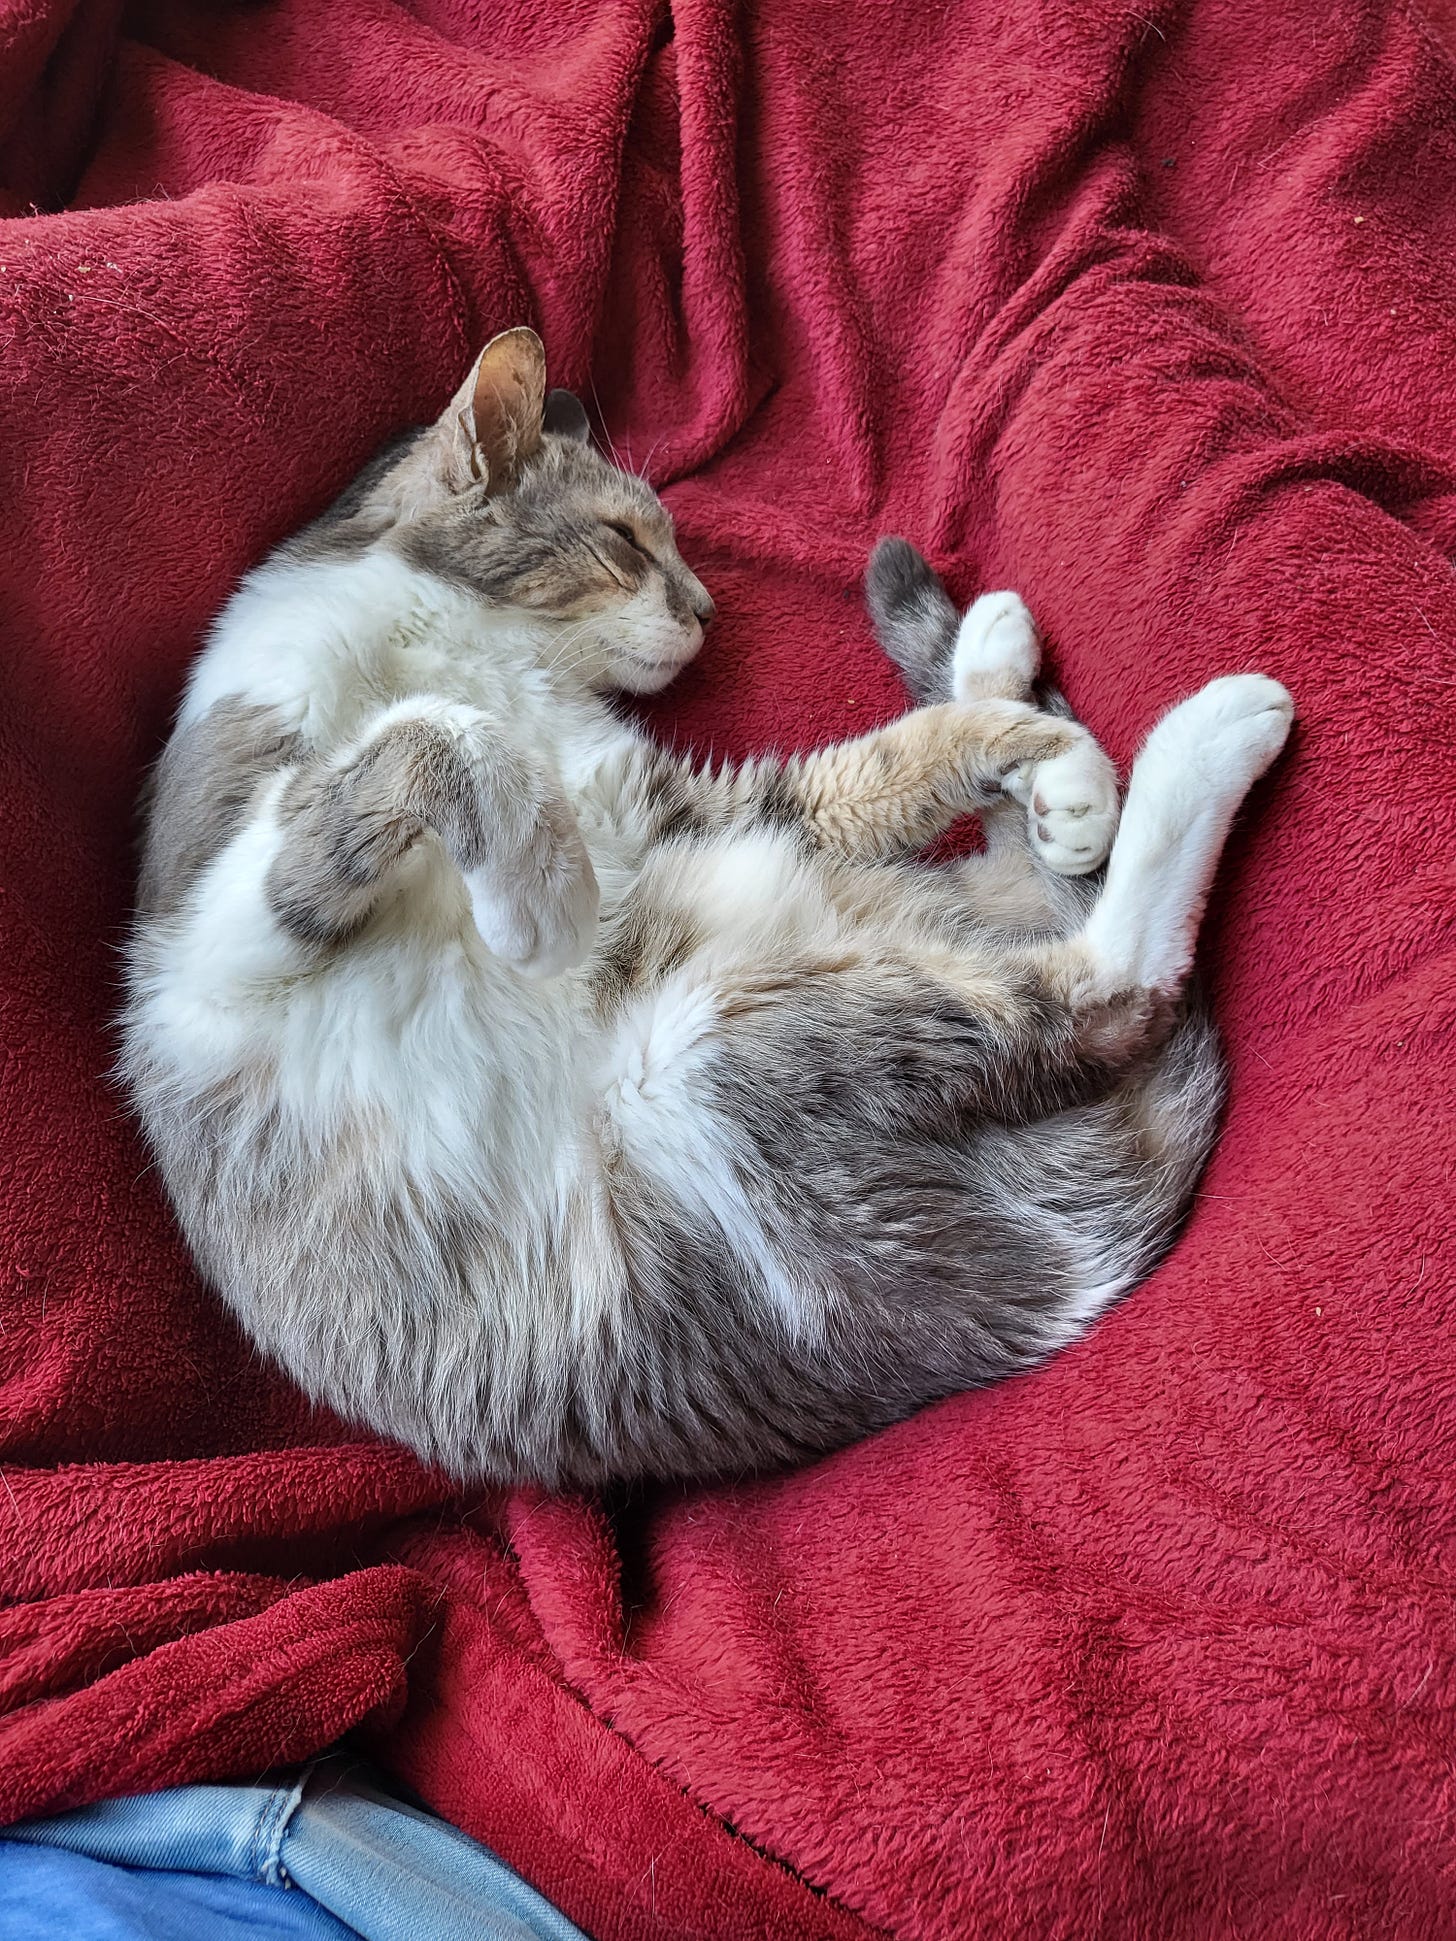 Shraga, an elderly and skinny gray and white tabby cat, curled up with some belly out in between my legs, which are covered in a red blanket.